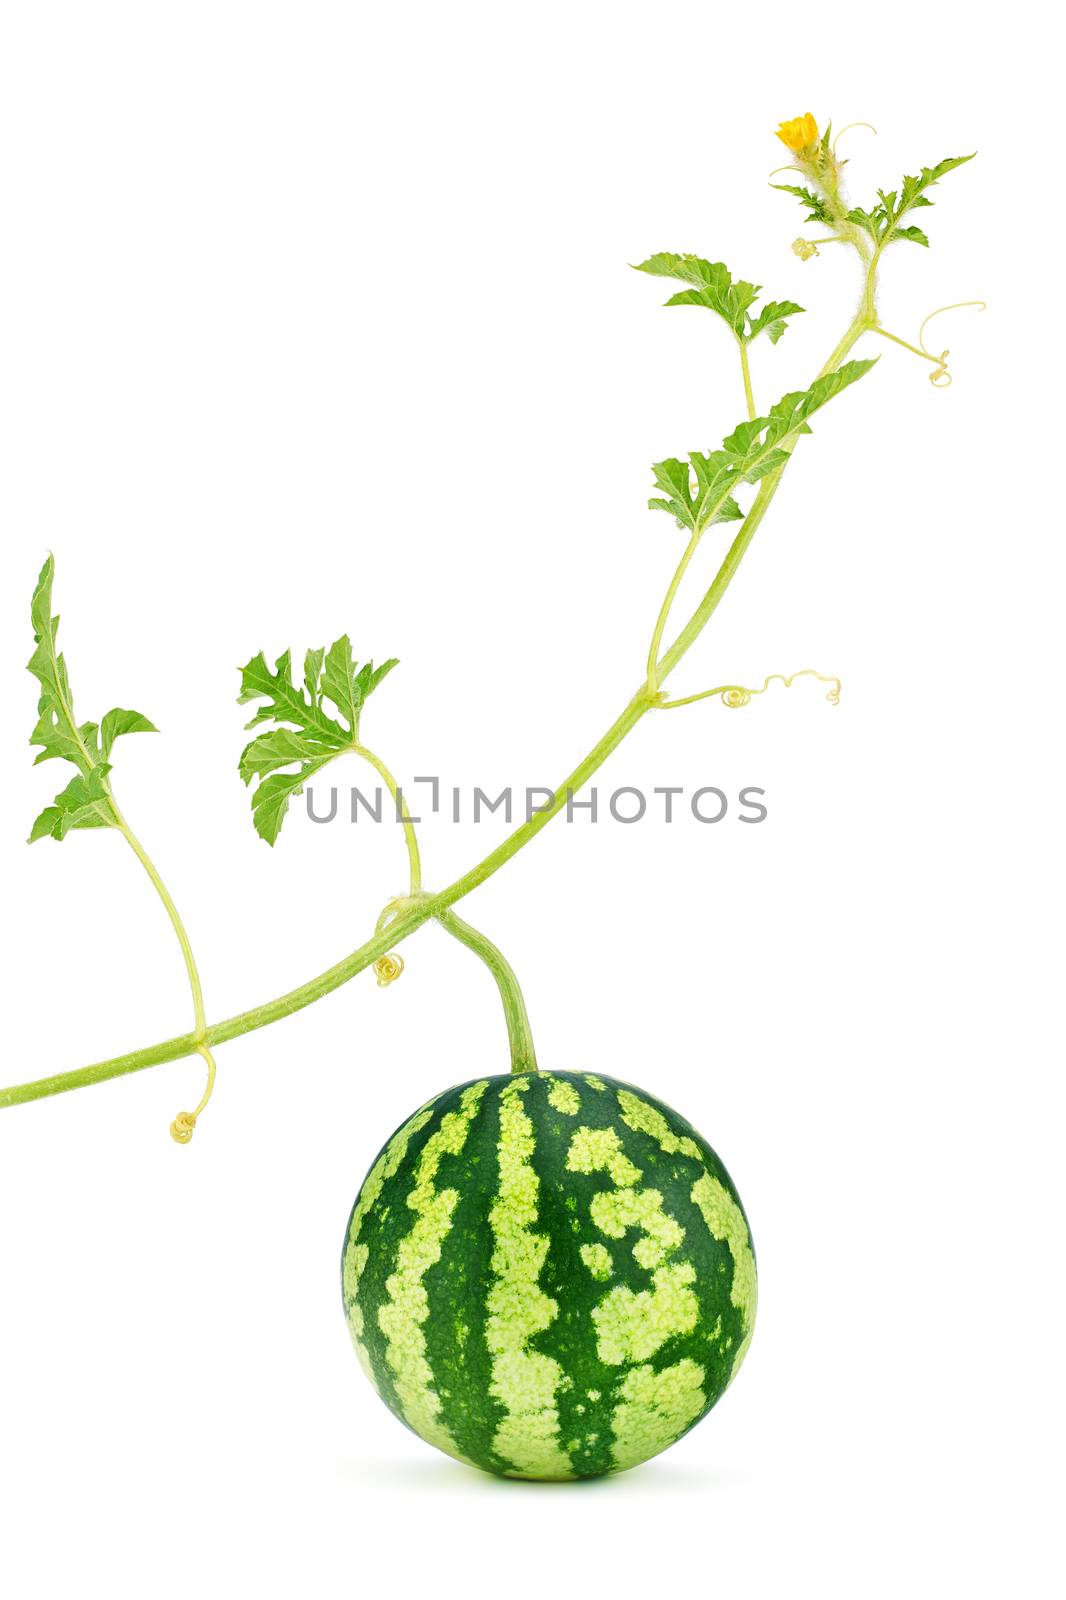 Watermelon. Fresh, juicy with green stem, leafs by 918